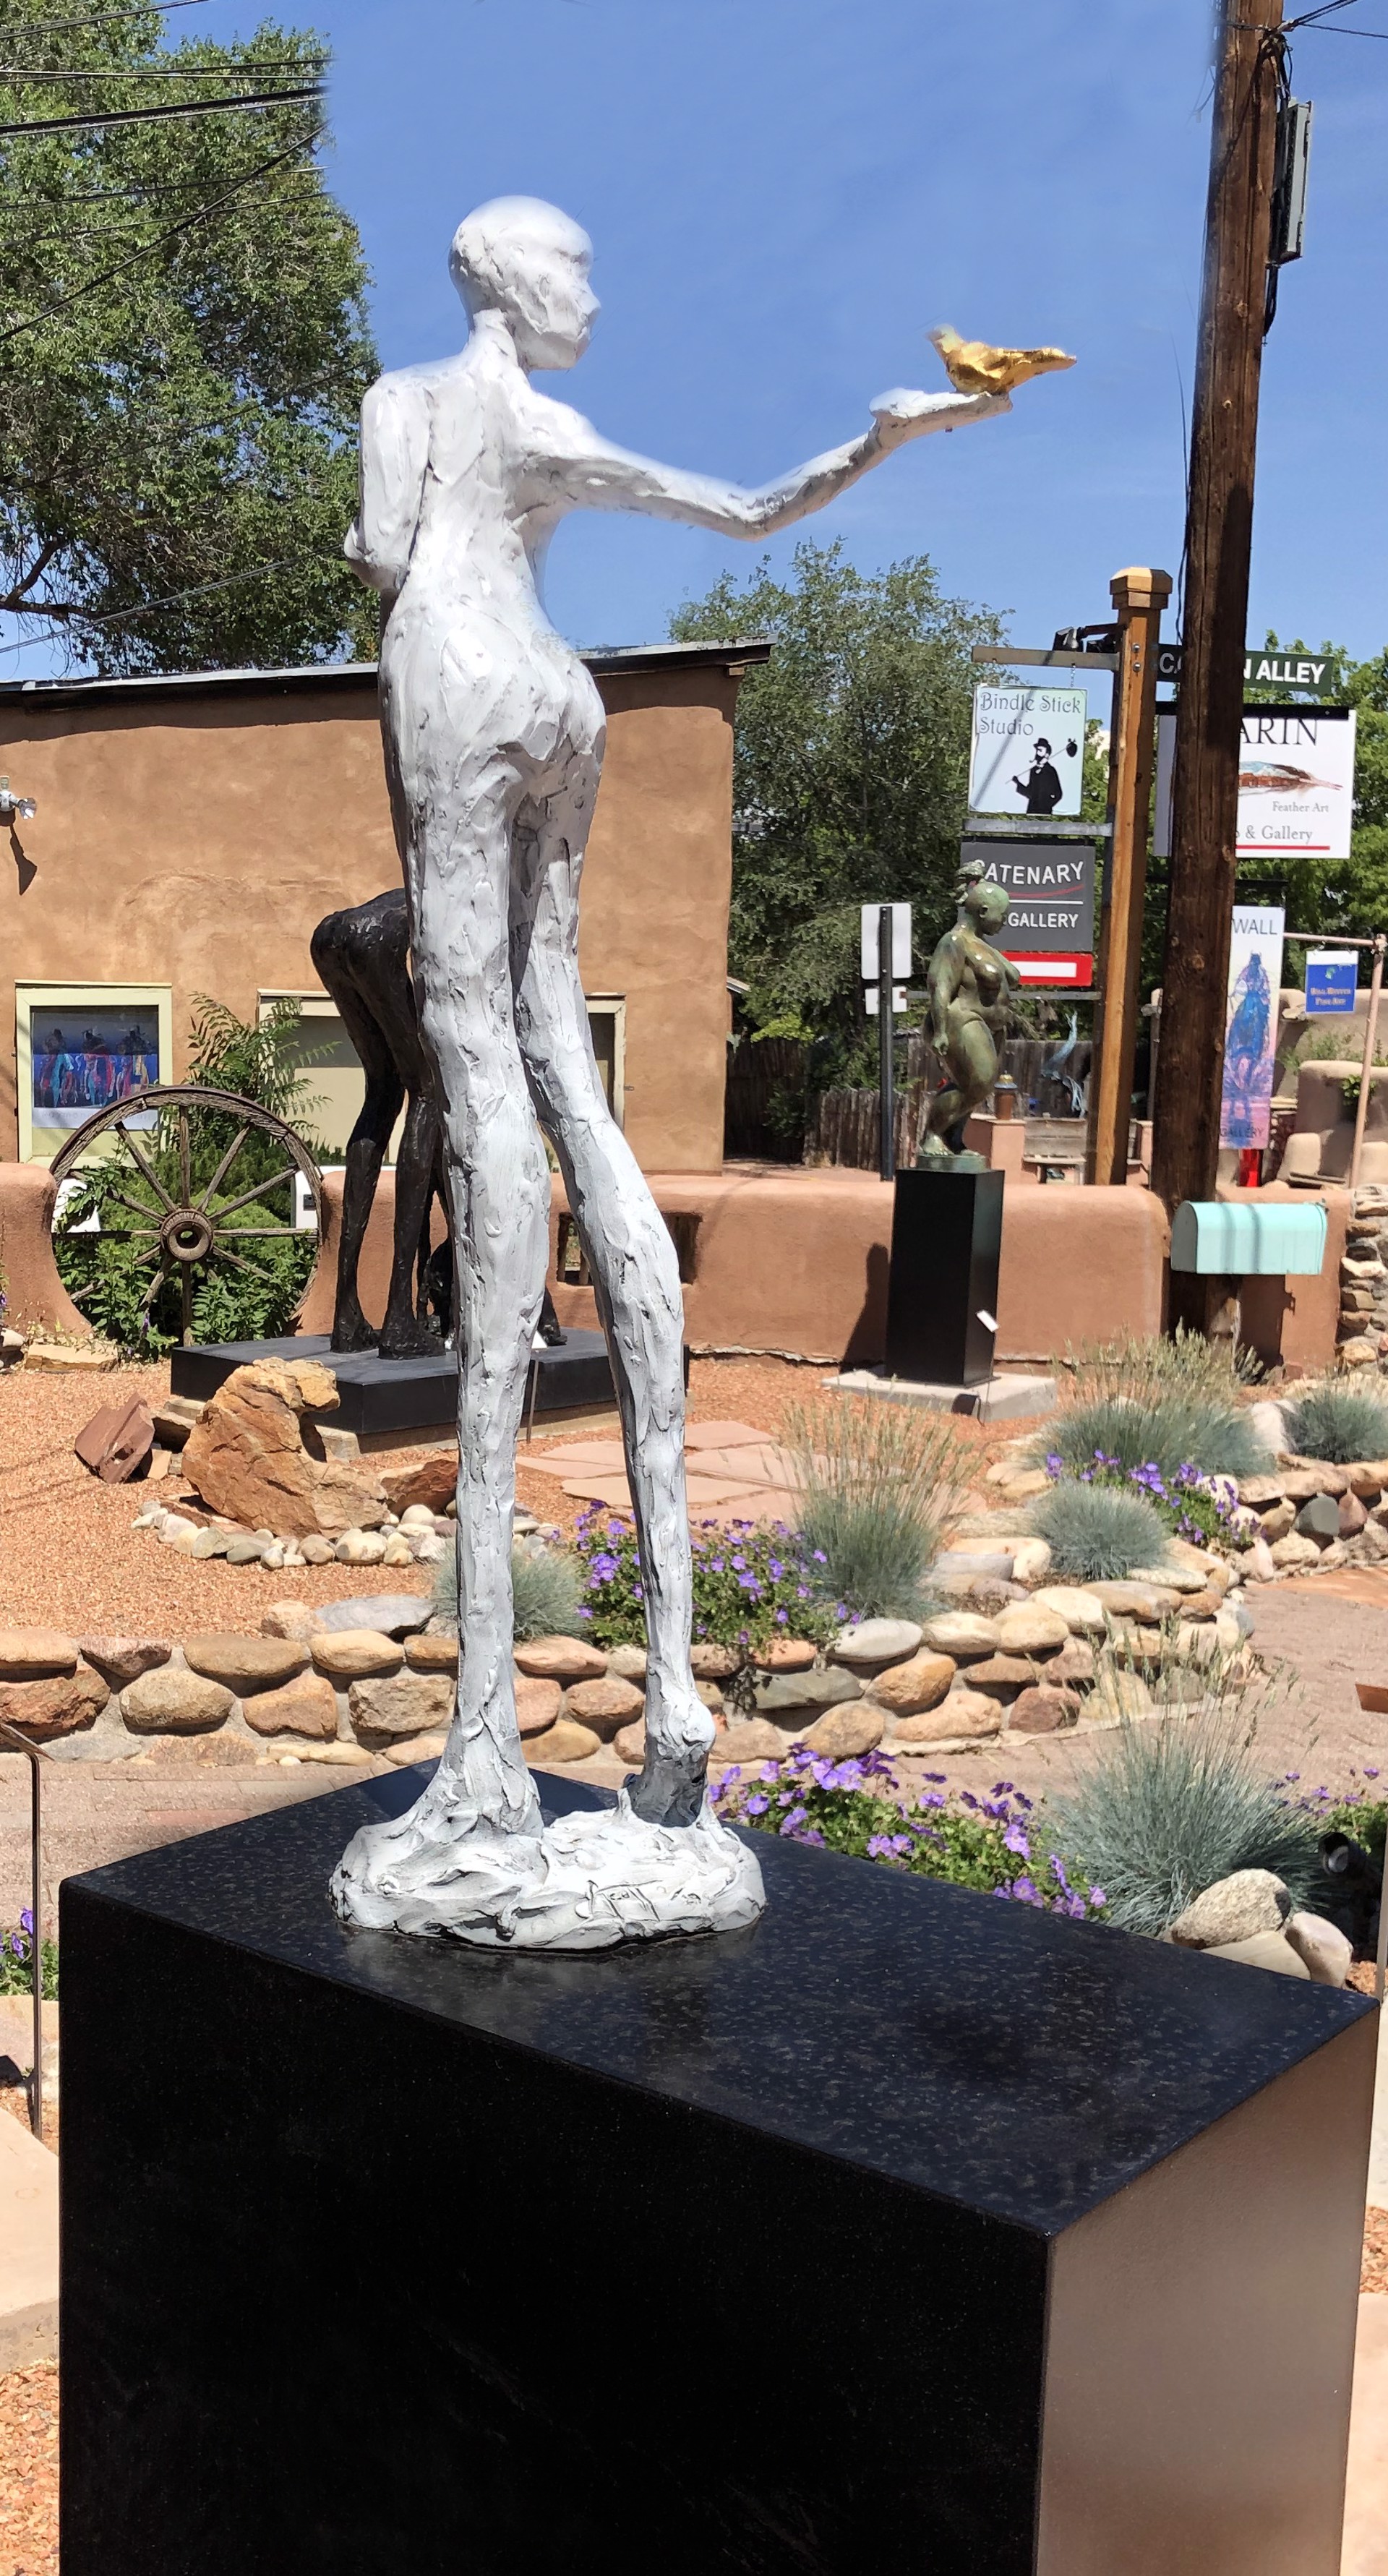 Welcoming Hope (69" tall with pedestal) by Lorri Acott